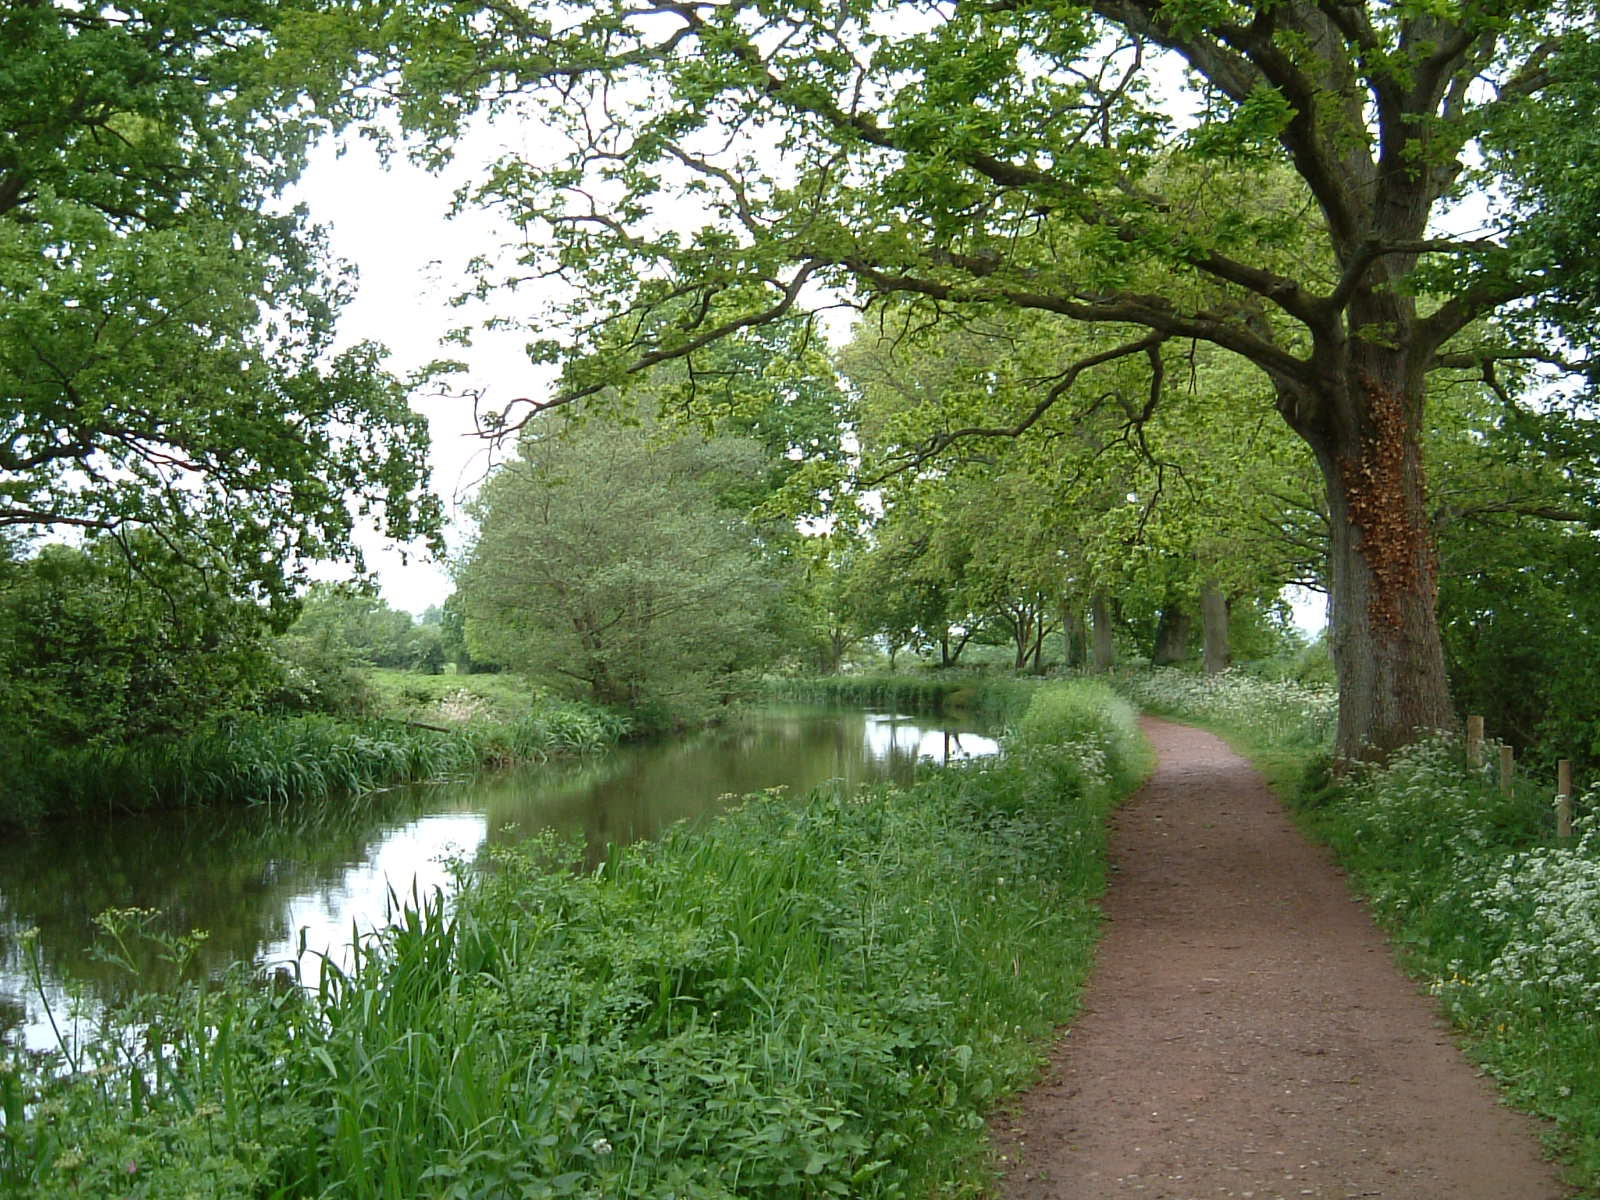 The Great Western Canal